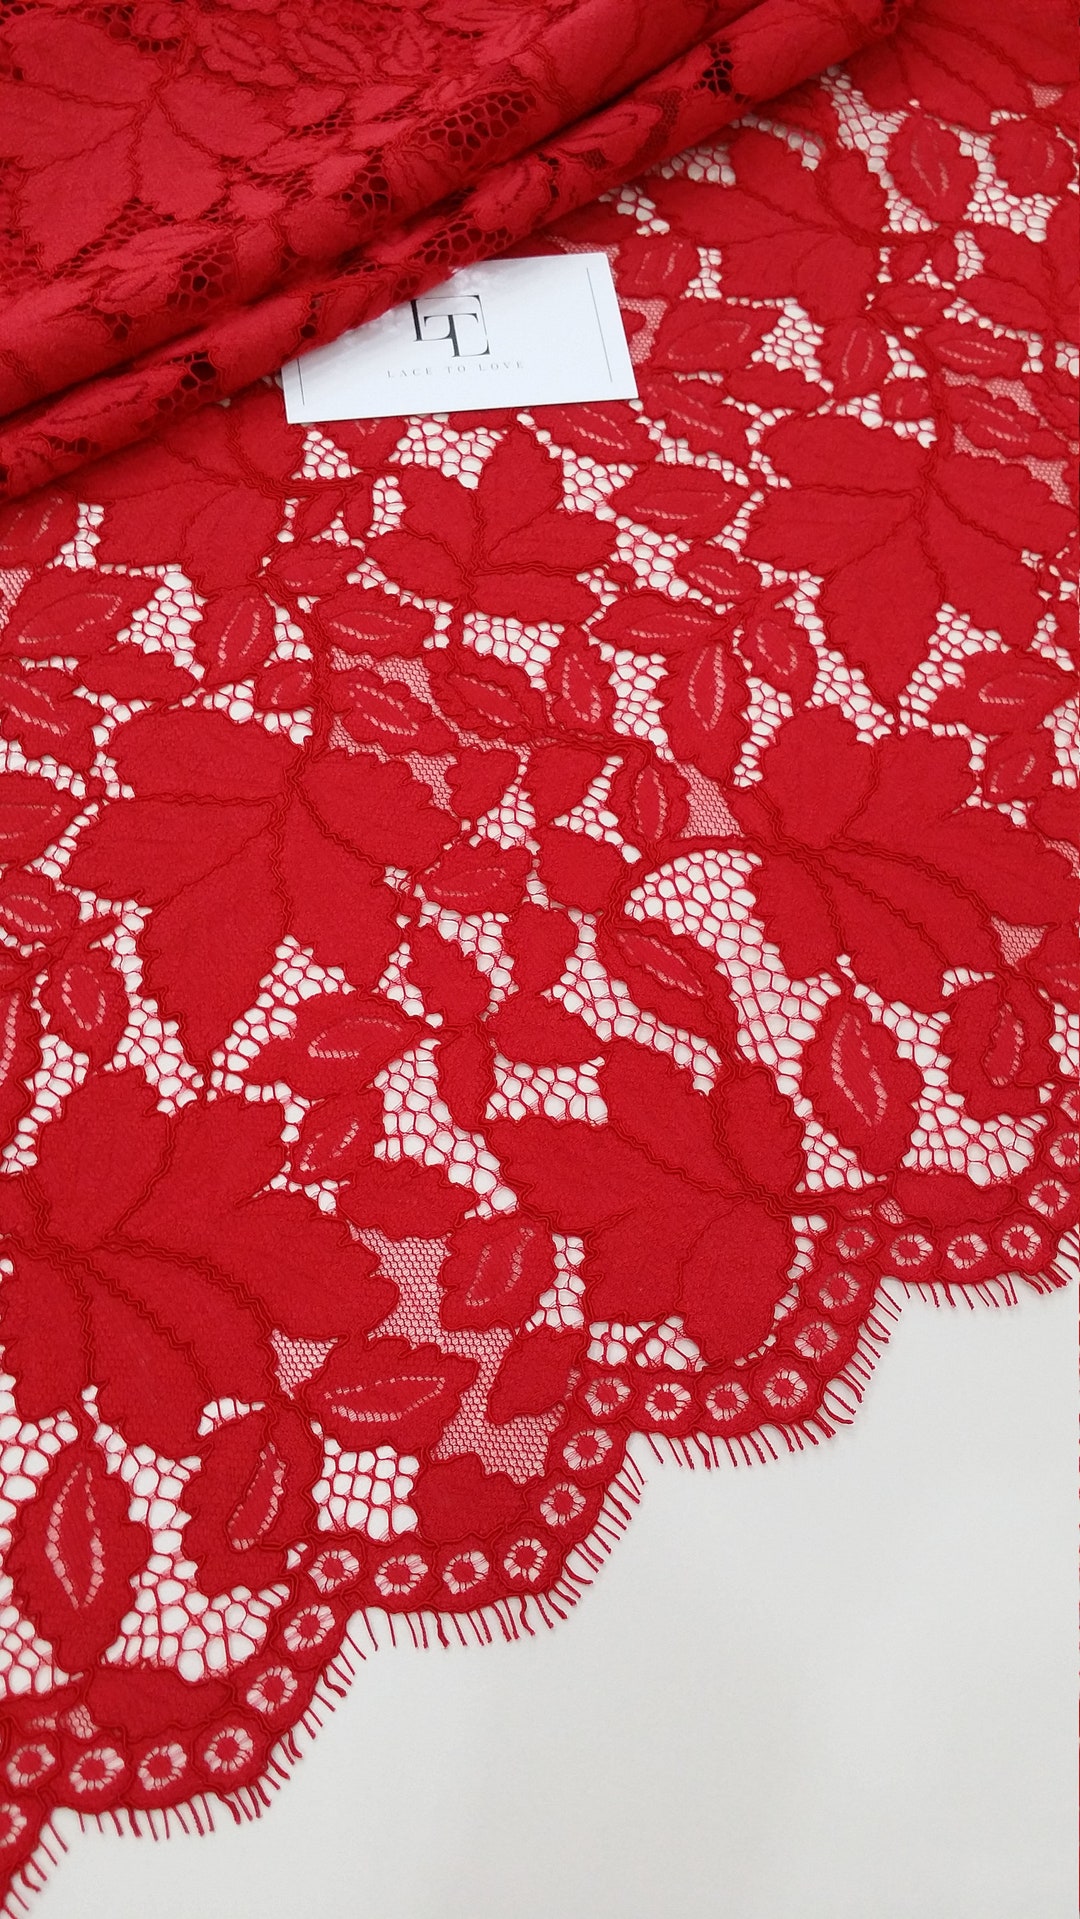 Pink Lace Red Alencon Lace Fabric LL89641 - Etsy